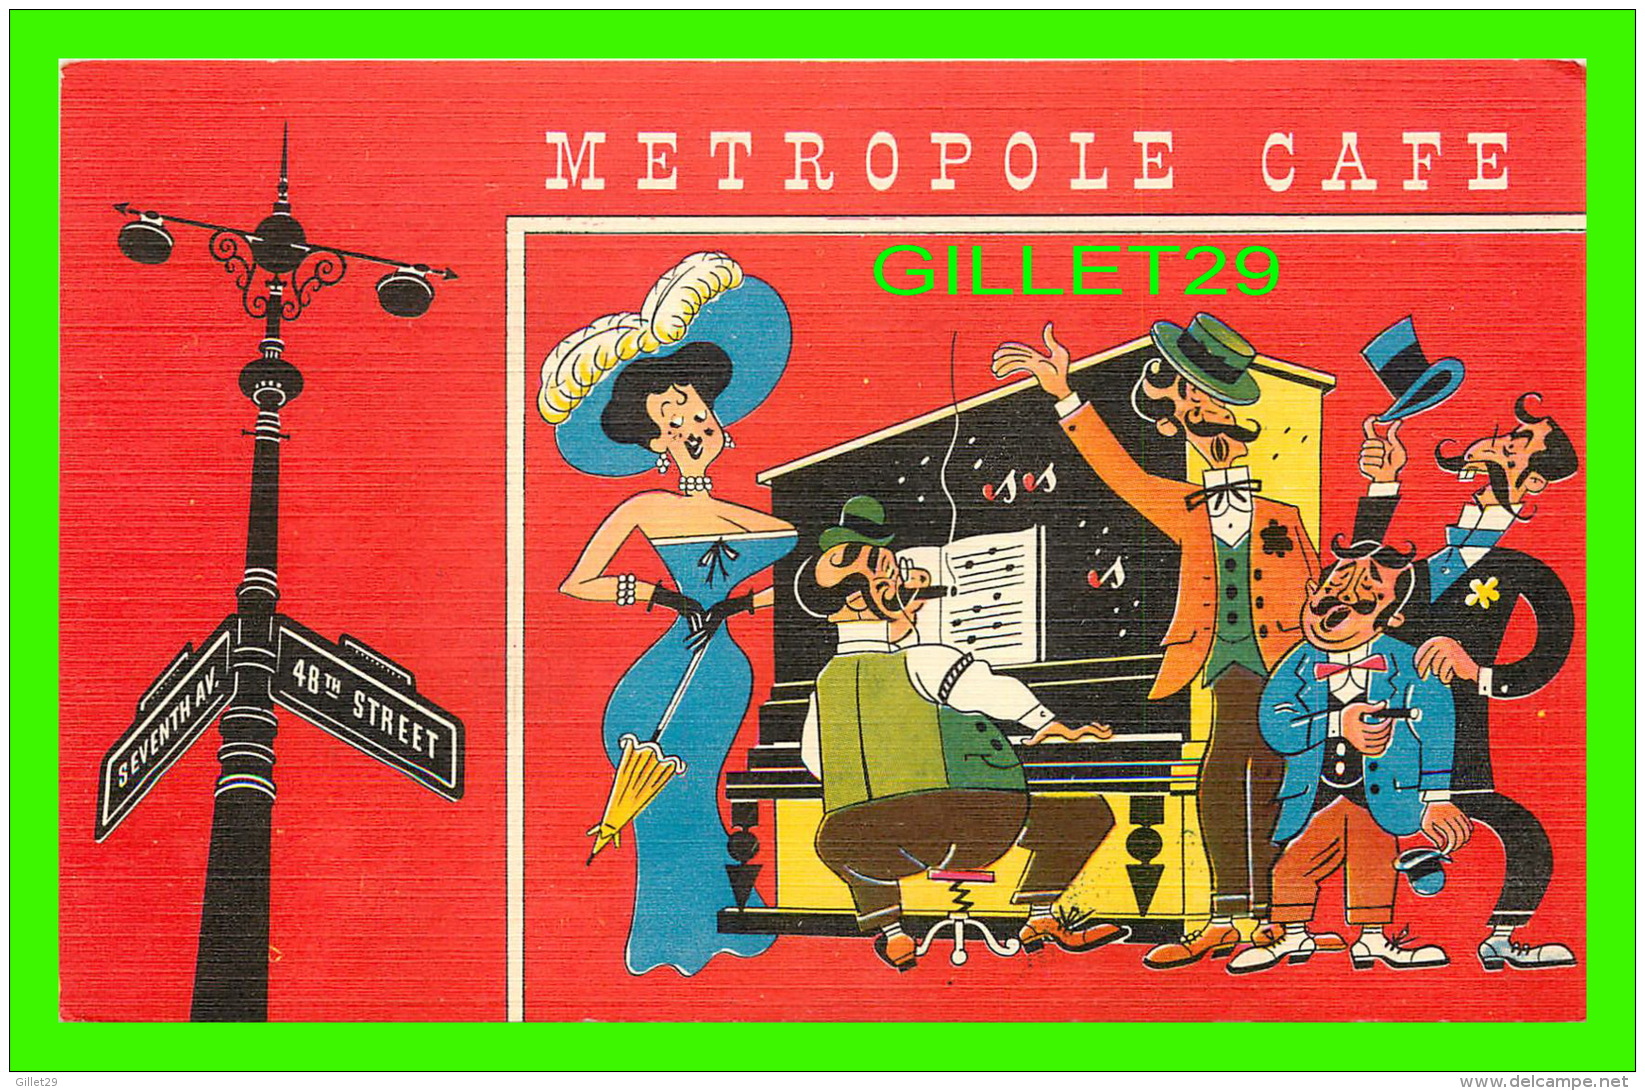 NEW YORK CITY, NY - METROPOLE CAFE - "THE METROPOLE GAY NINETY REVUE" - - Time Square